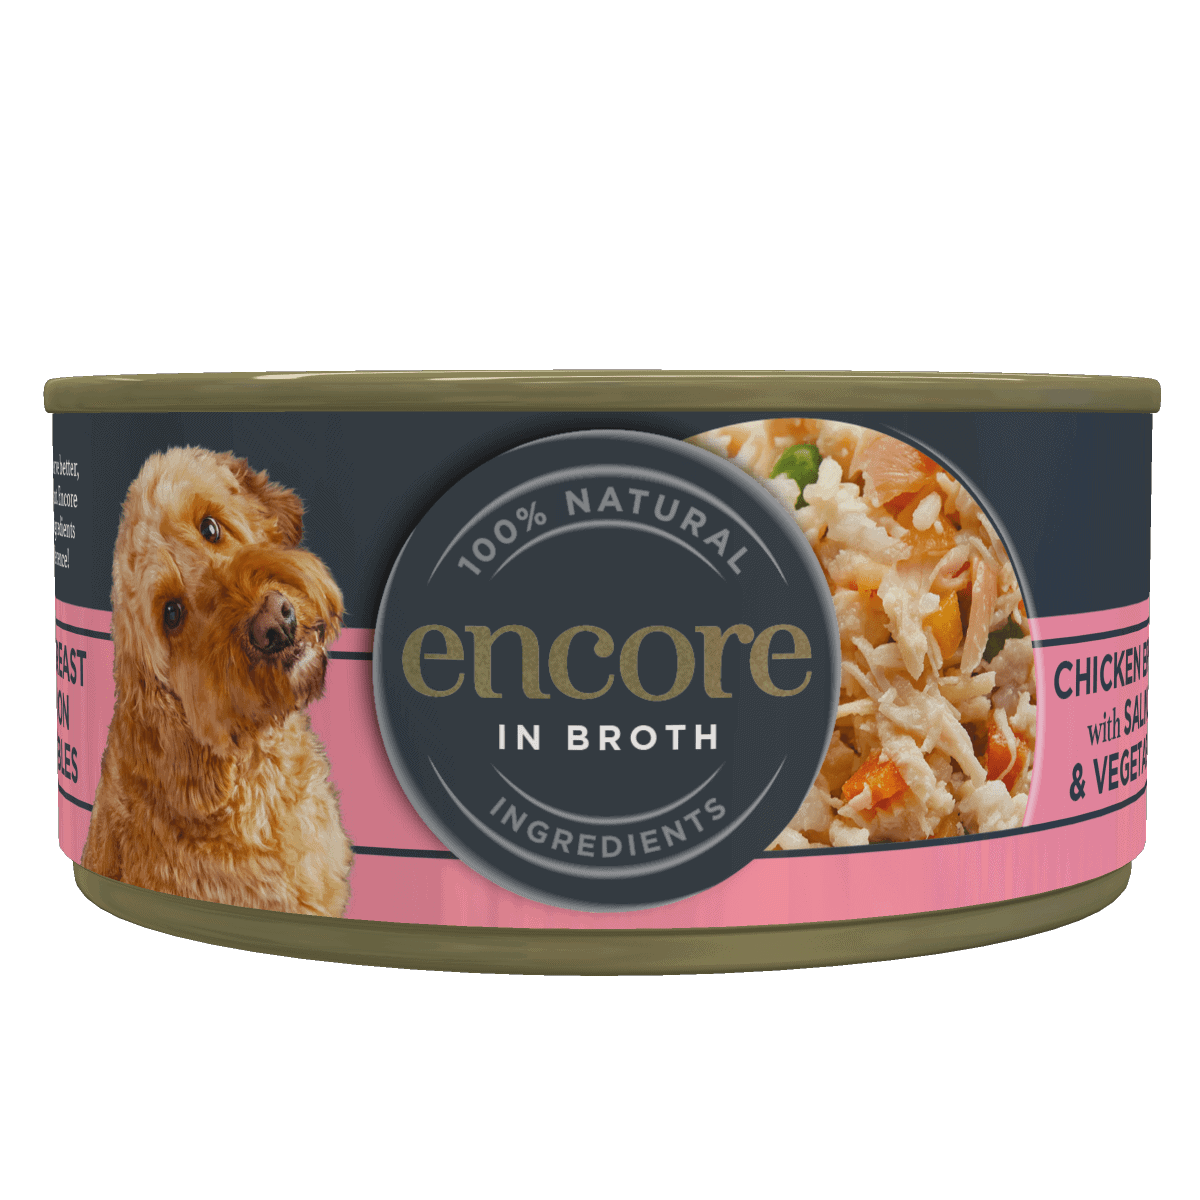 Encore chicken in broth dog food with salmon & vegetables tin